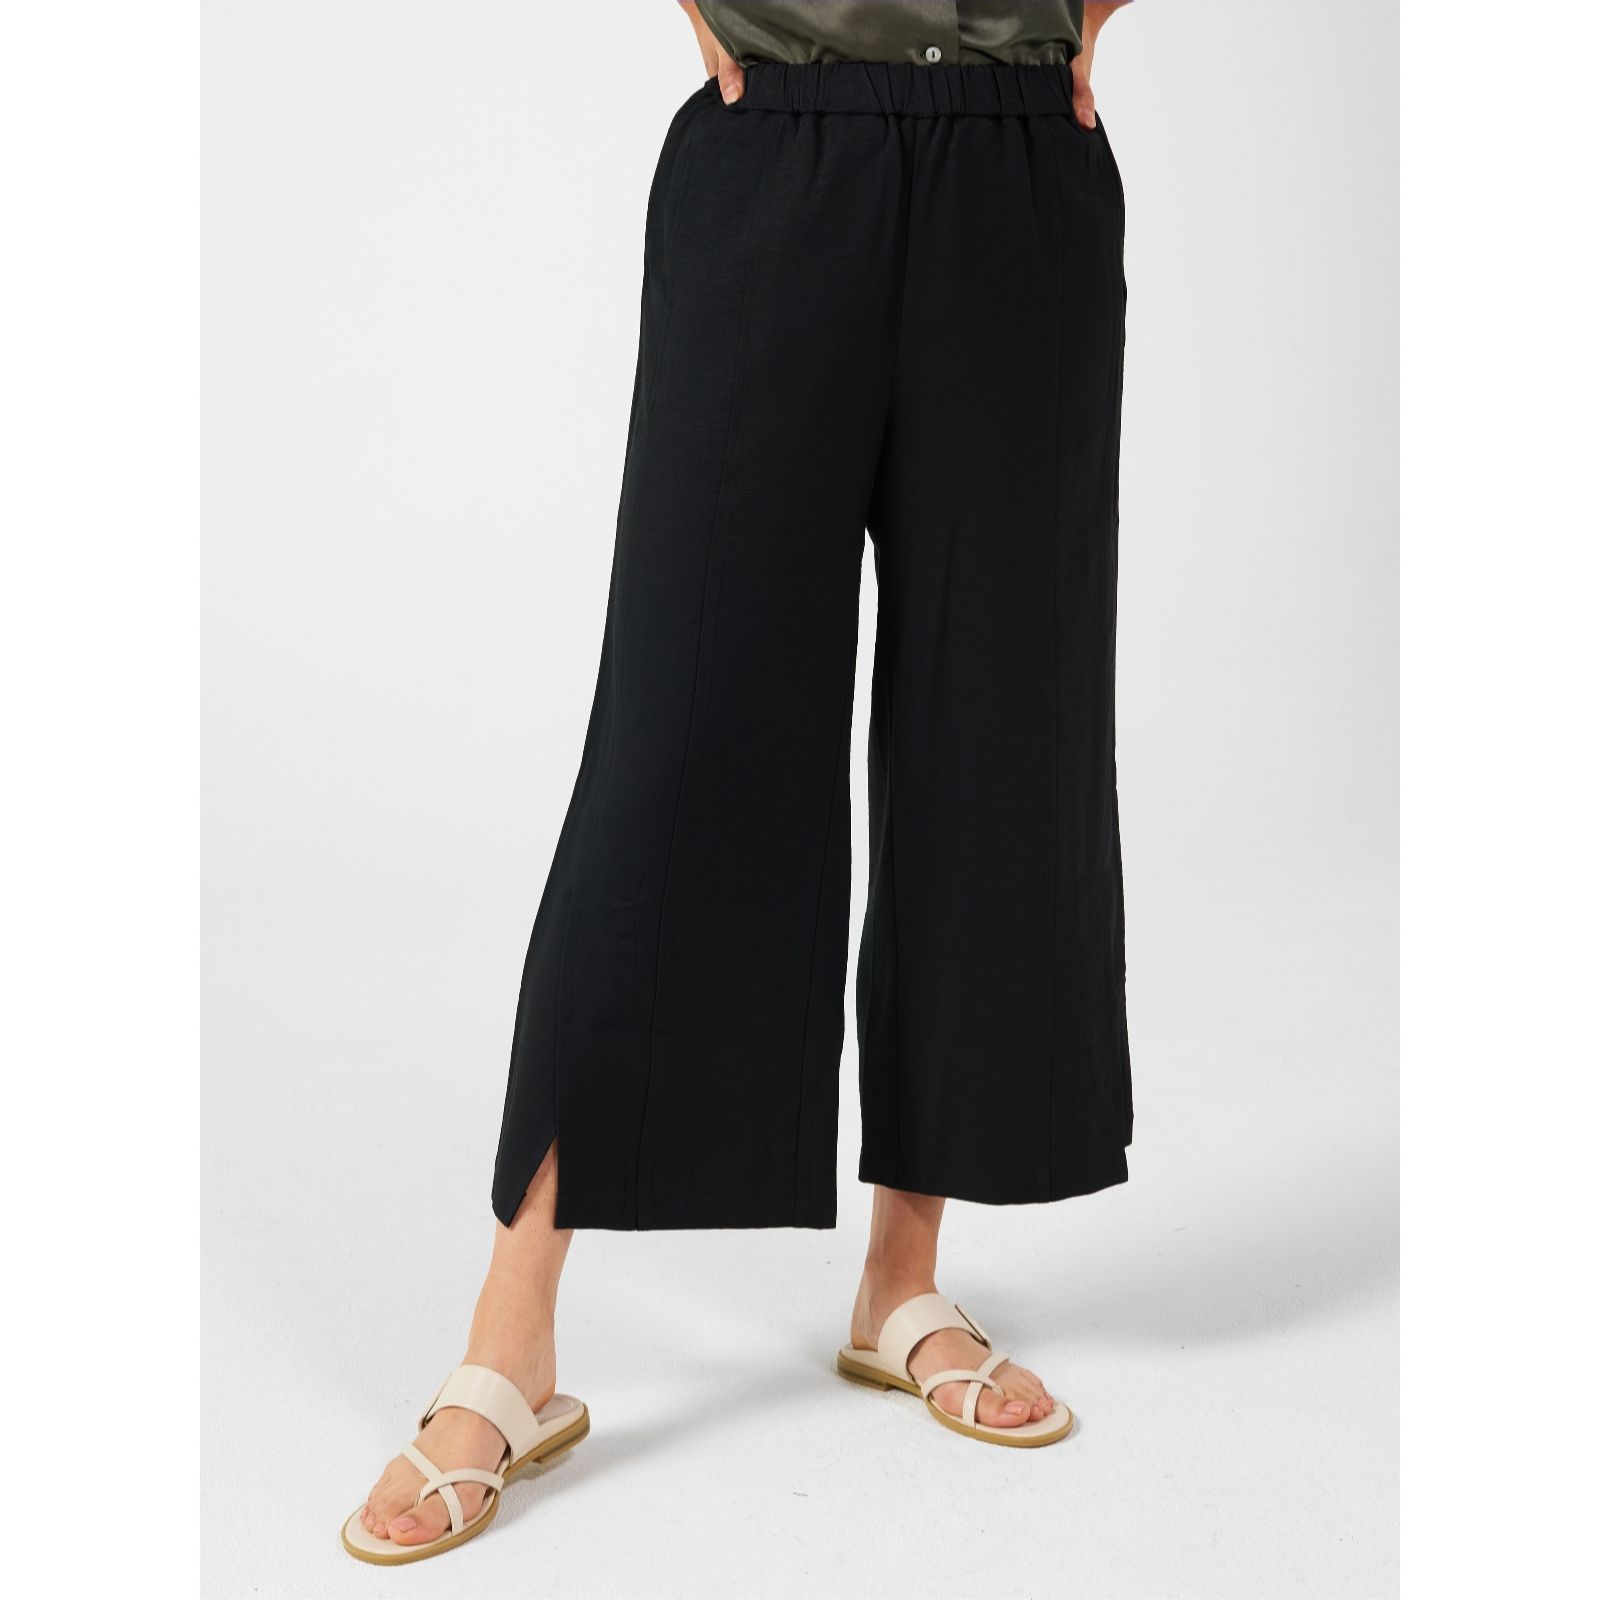 WynneLayers Polished Knit Crop Pant with Grommets